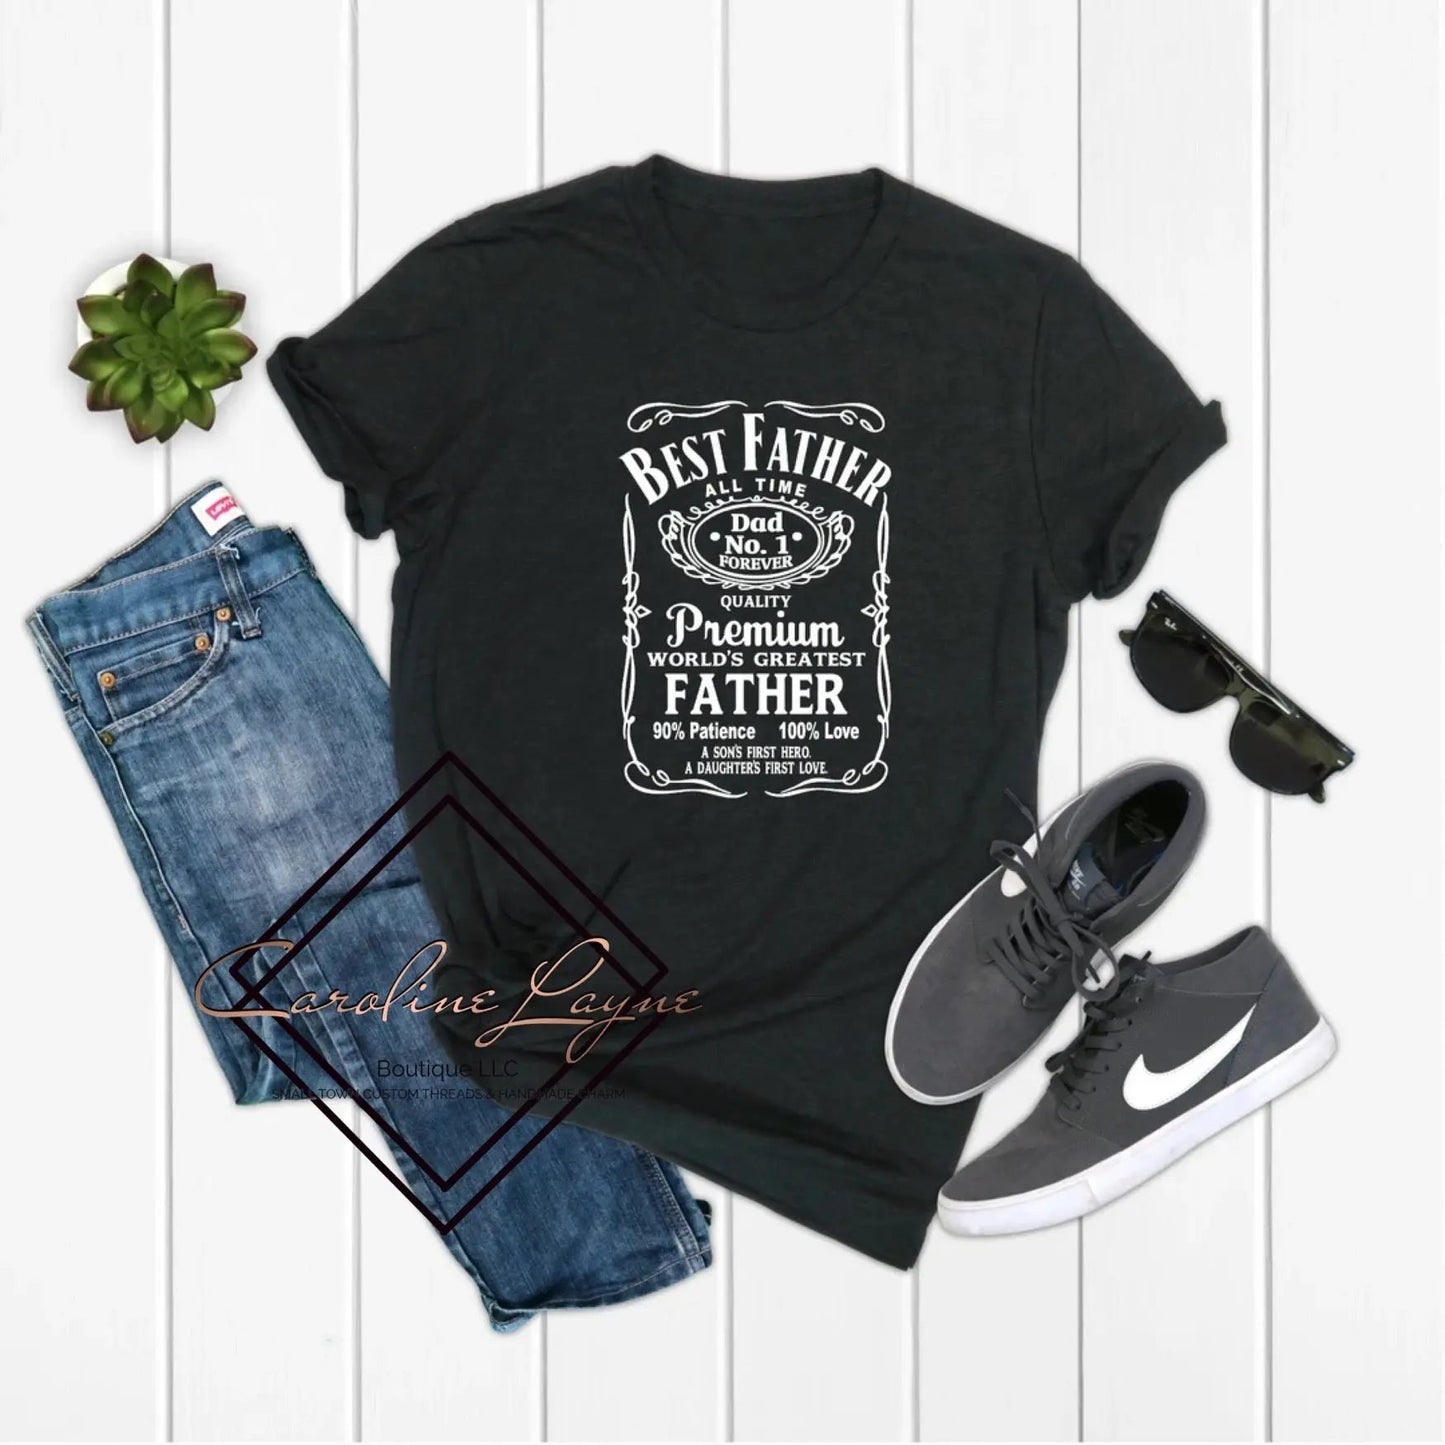 Best Father All Time Tee - Caroline Layne Boutique LLC